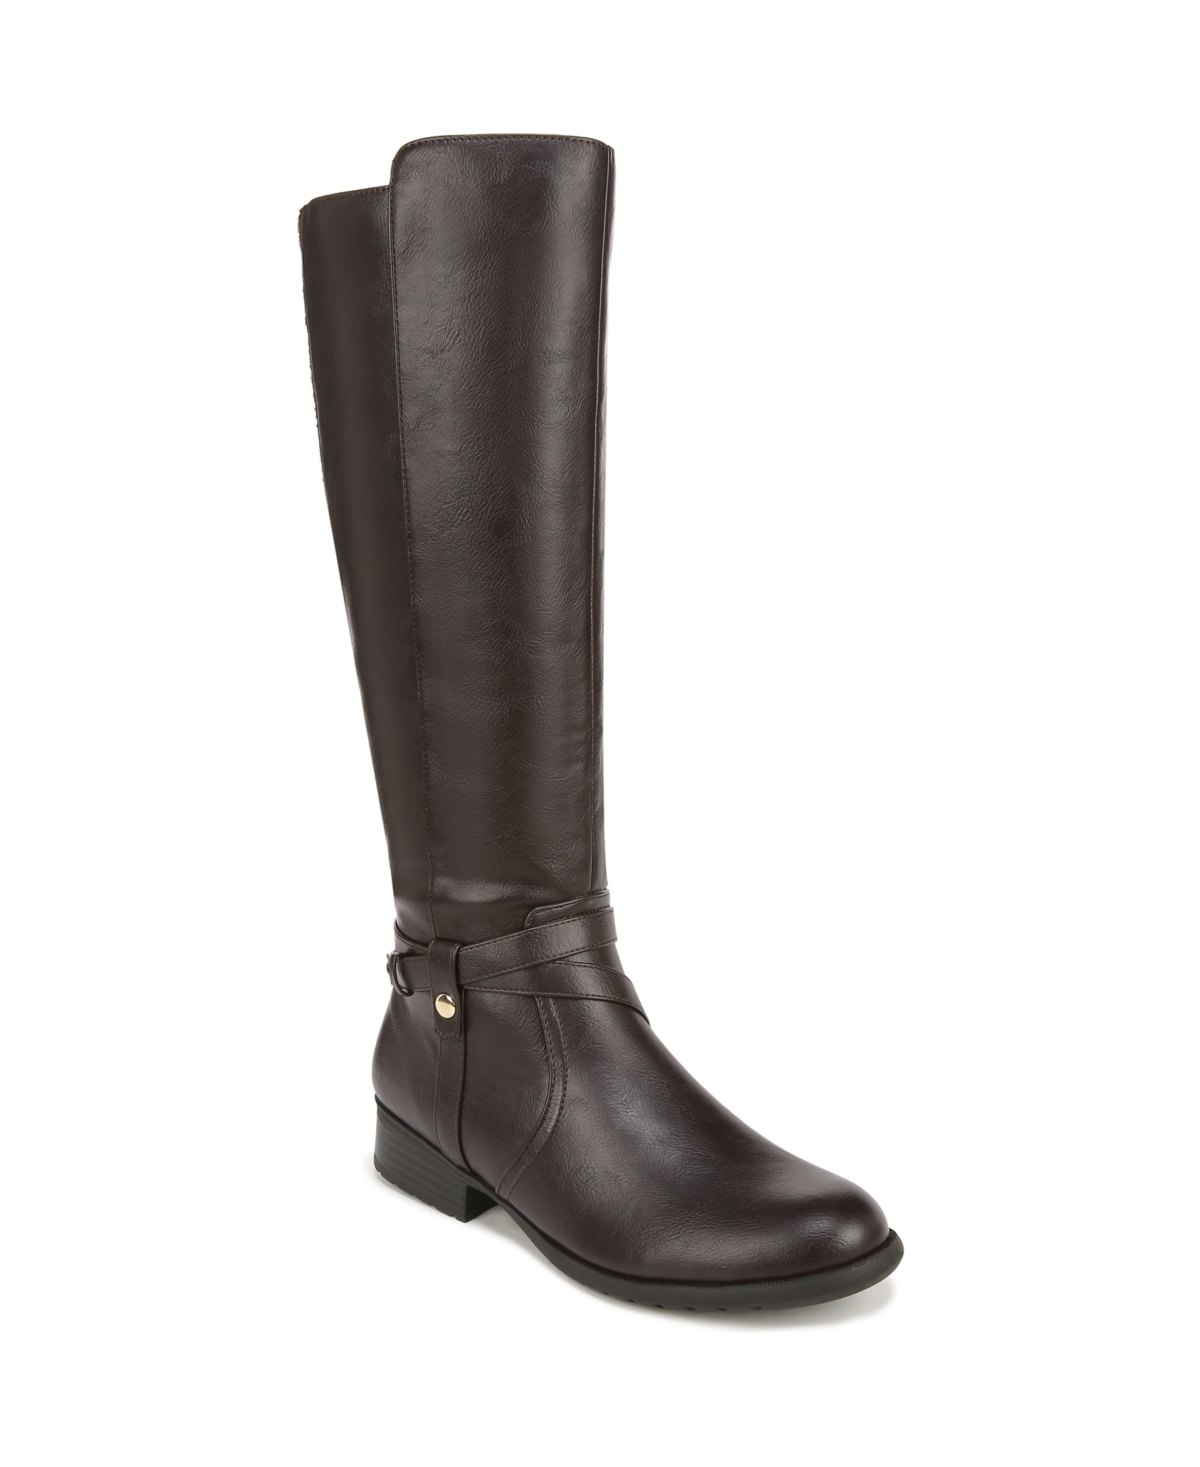 X-trovert Wide Calf Riding Boots - Mushroom Faux Leather